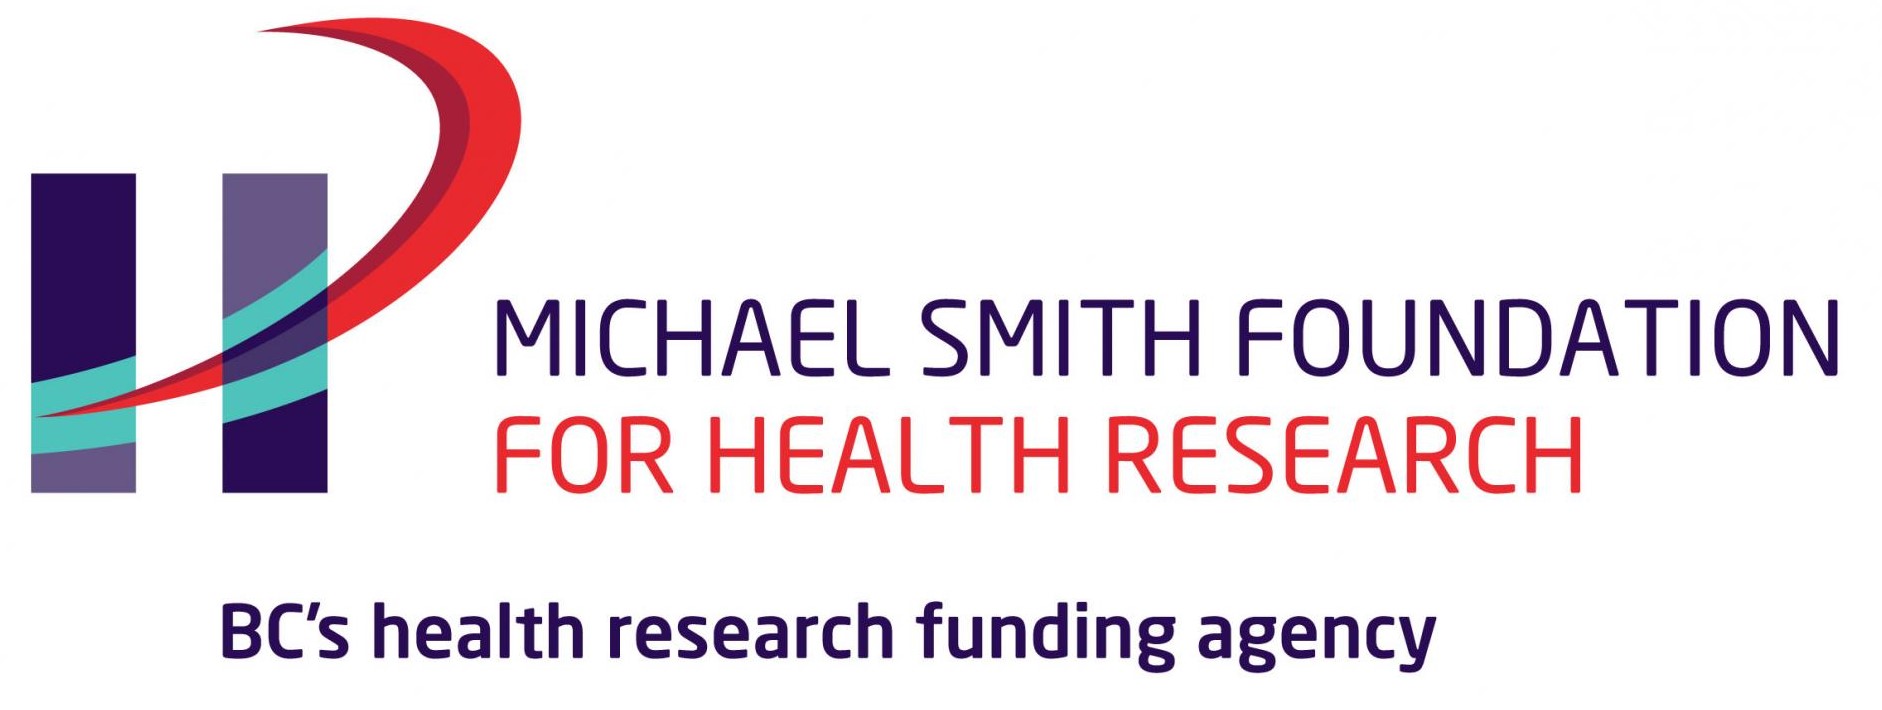 Michael Smith Foundation for Health Research Logo